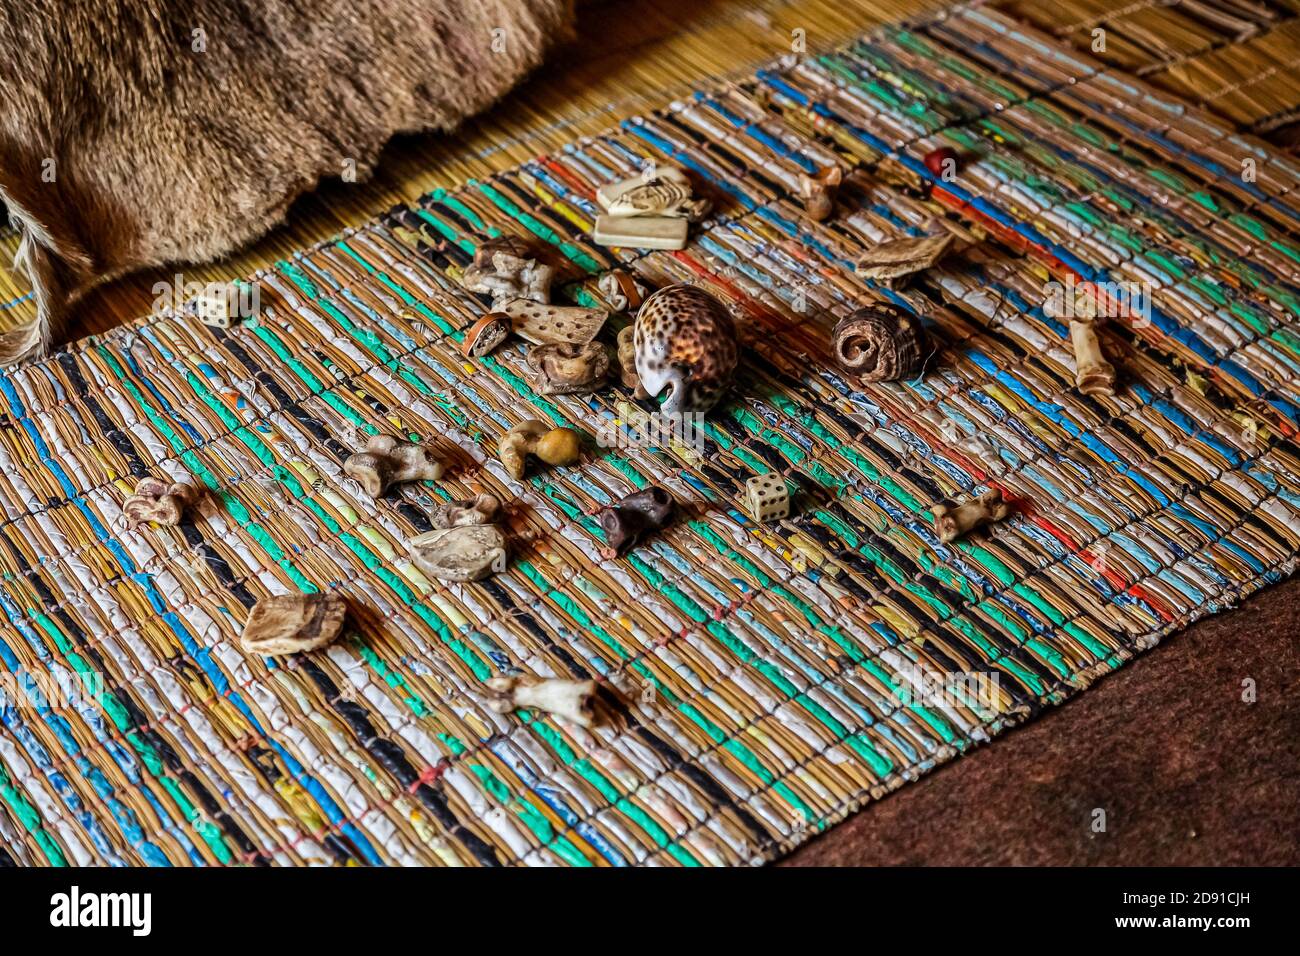 Sabi Sabi, South Africa - May 5, 2012: Traditional Healer known as a Sangoma or witch-doctor performing a spiritual reading with bones and shells Stock Photo